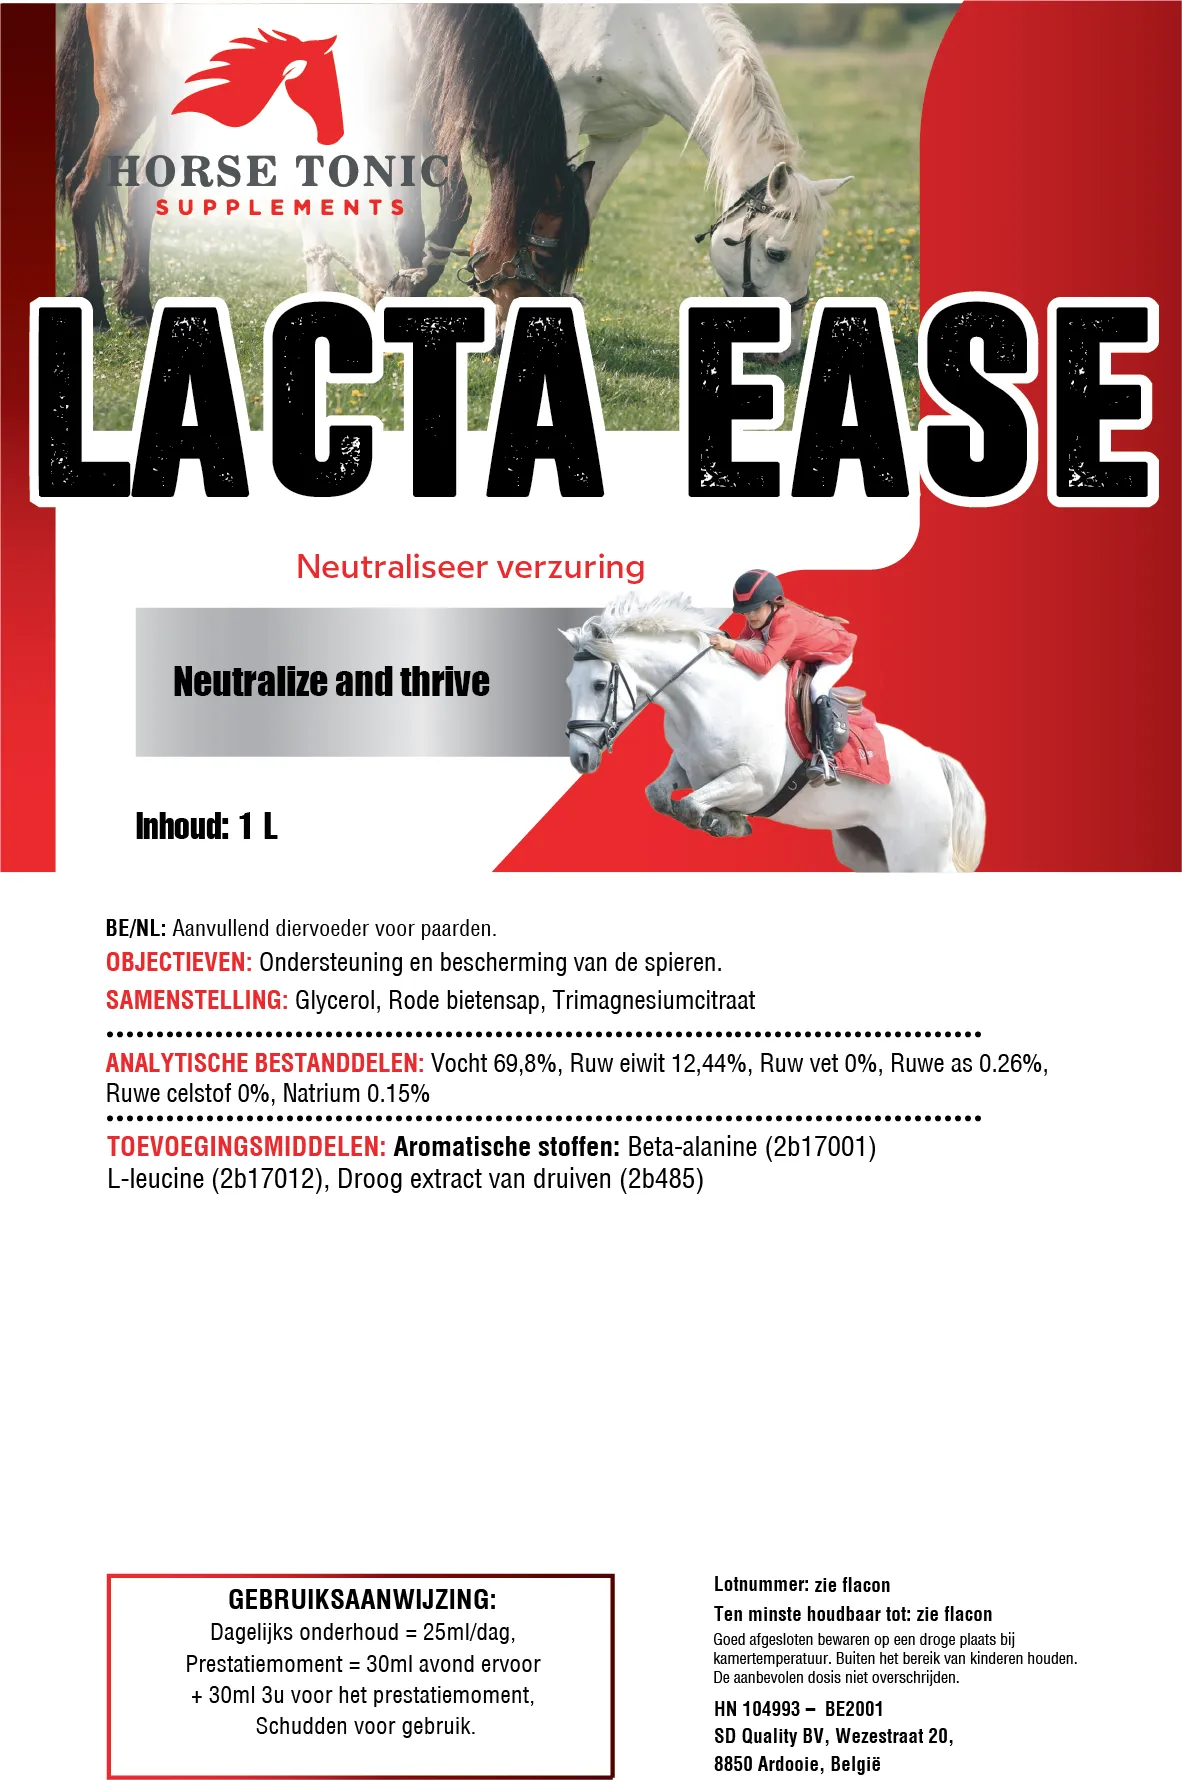 Lacta Ease for your horse